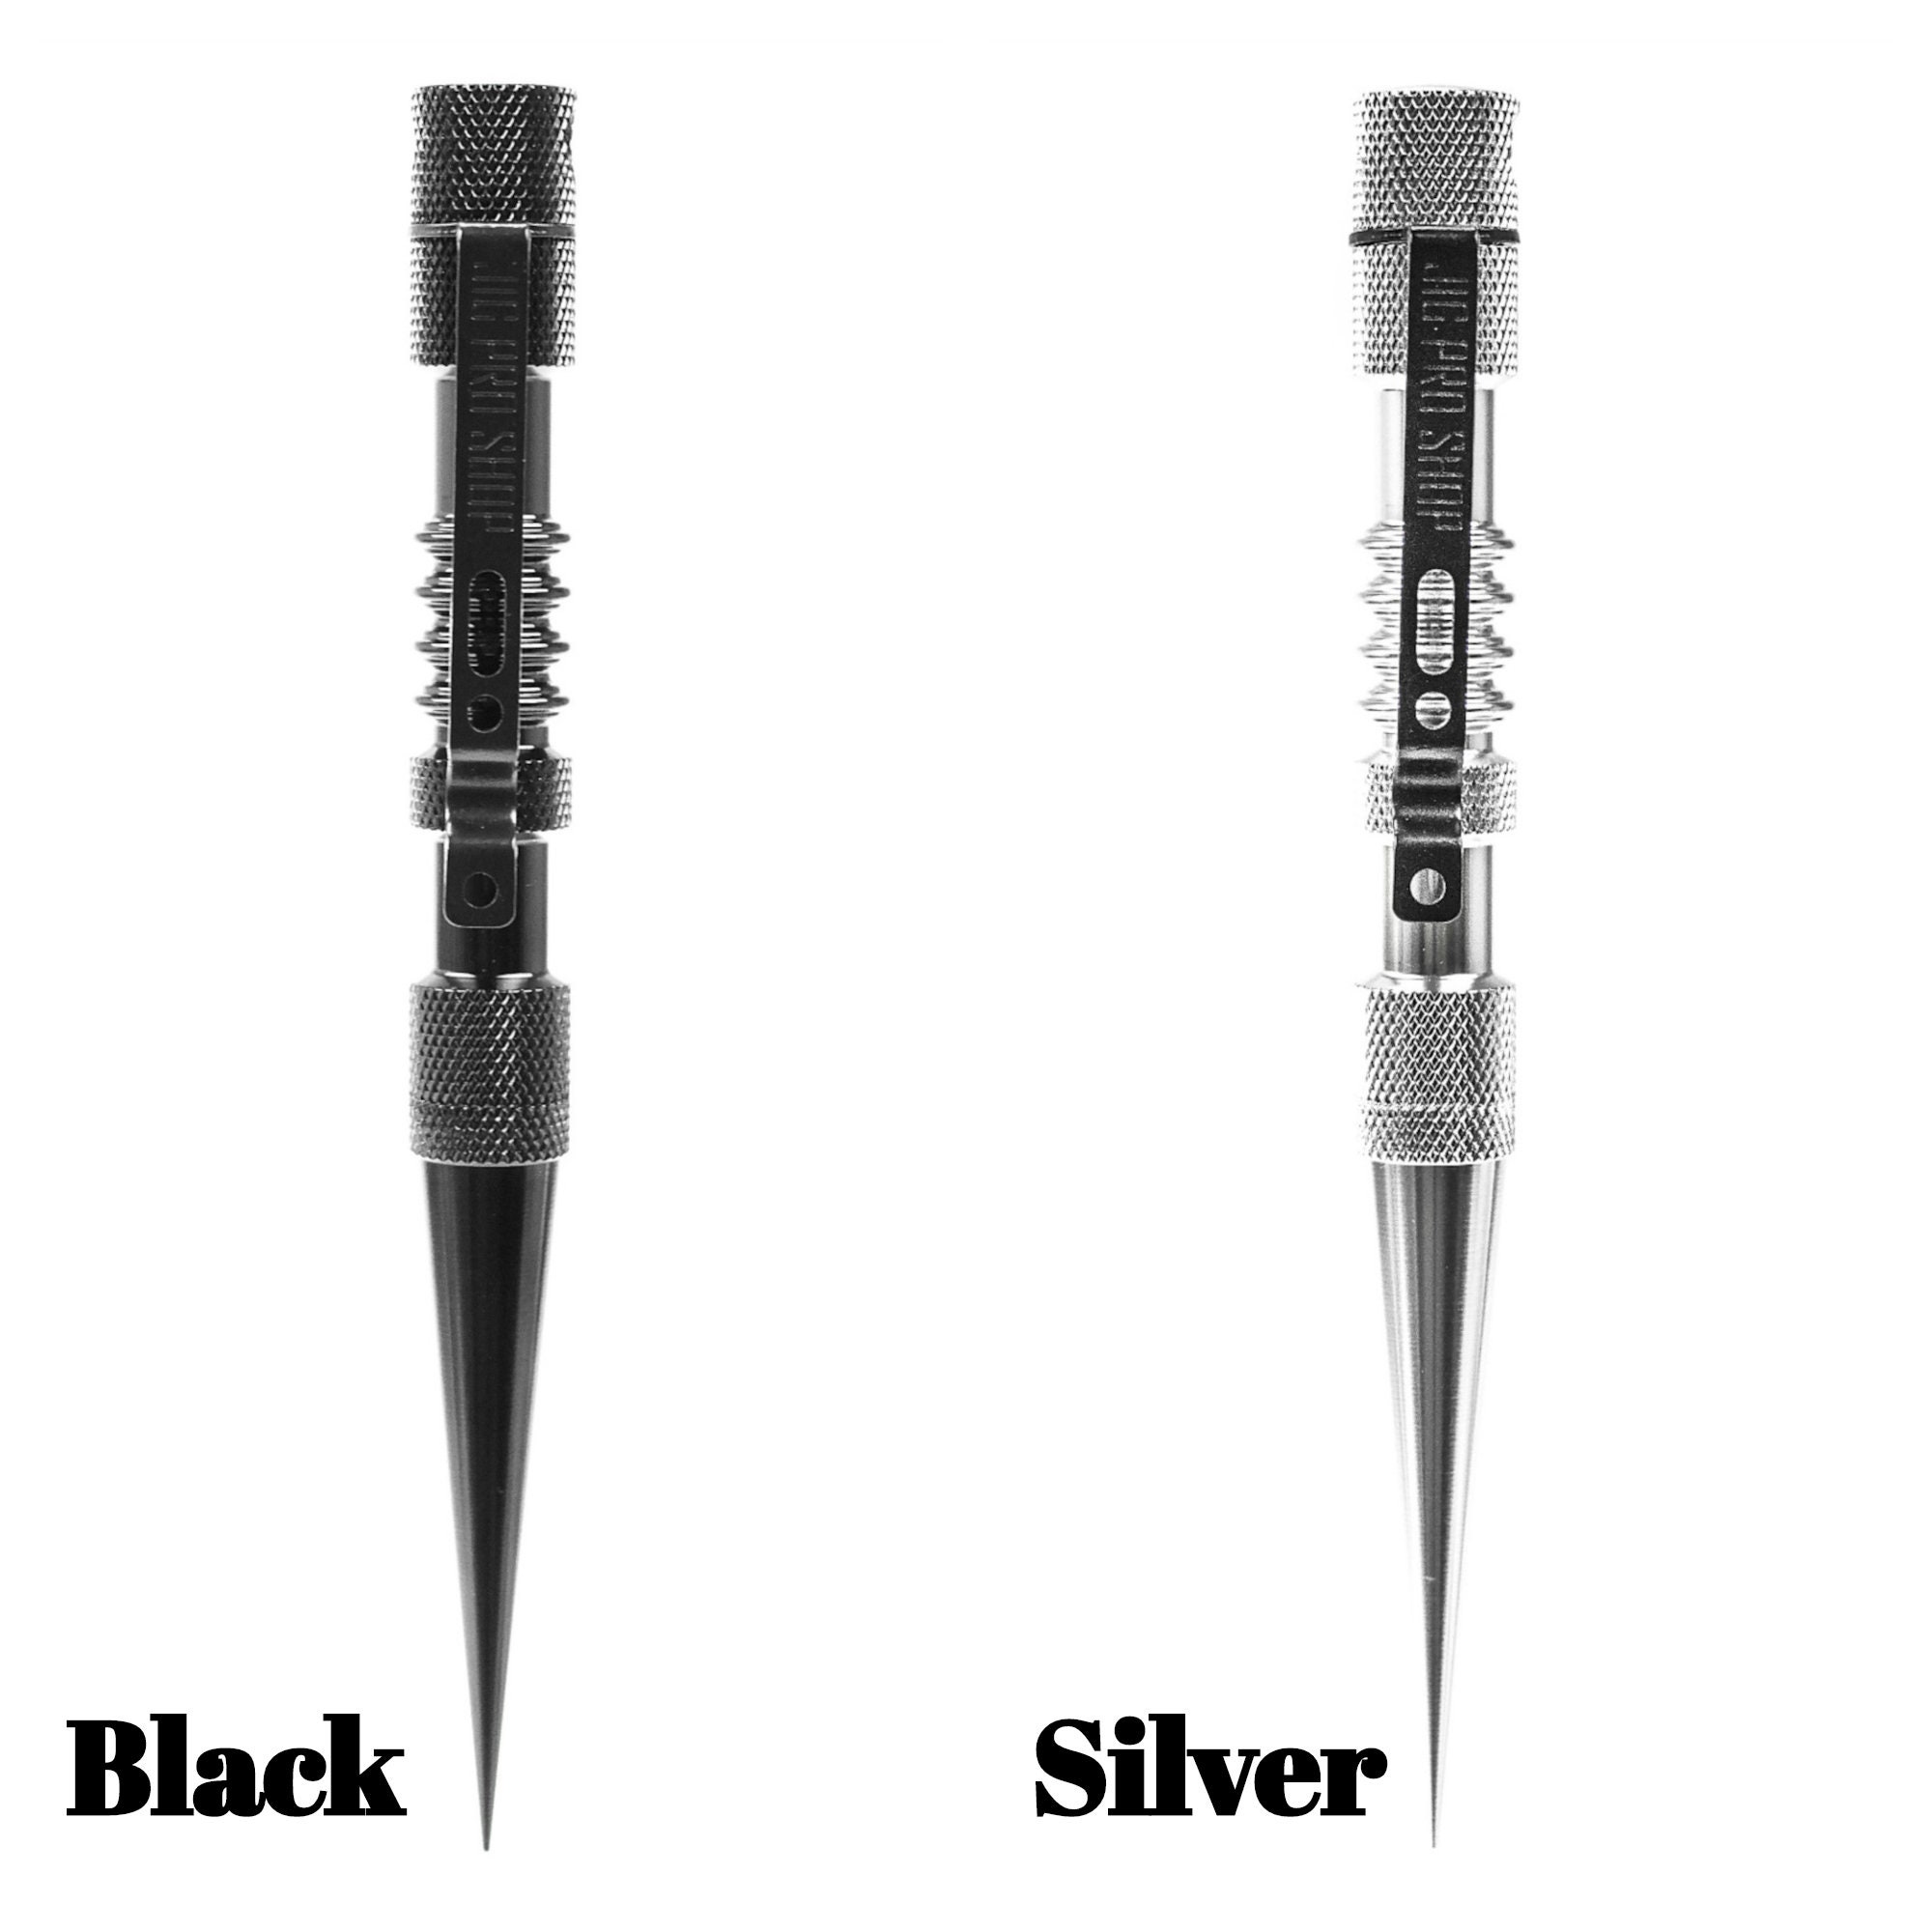 Black & Silver Marlin Spikes Paracord Knotters Tool Tools W/ Colorful FIDS  Paracord, Leather, Rope Loaded Marlin Spike 